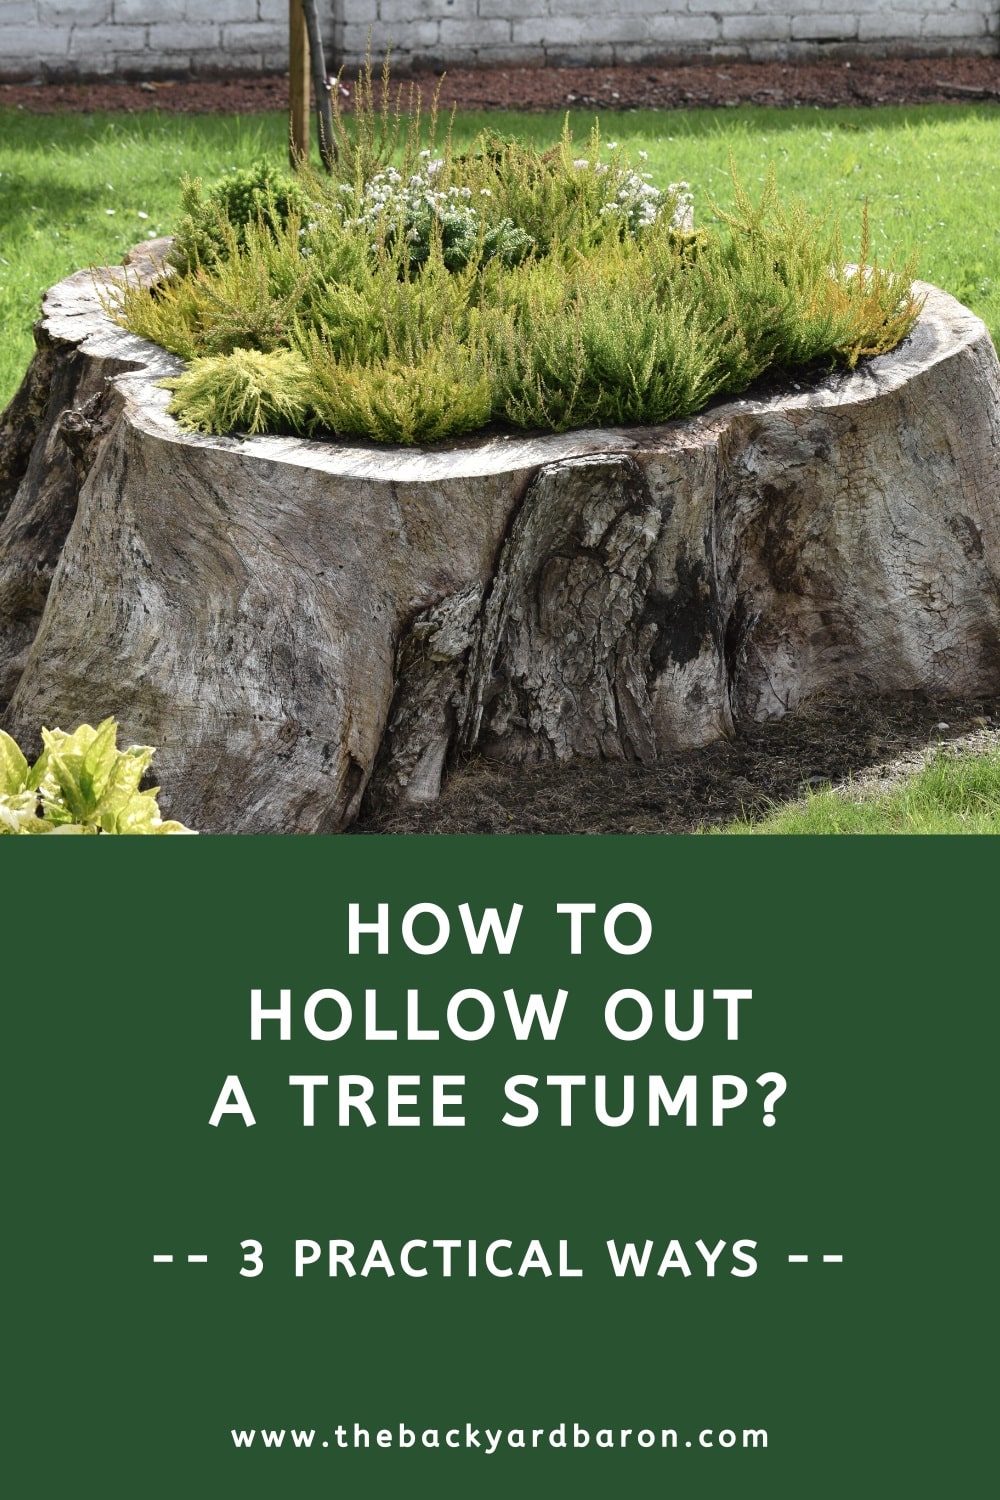 How to hollow out a tree stump (3 ways)